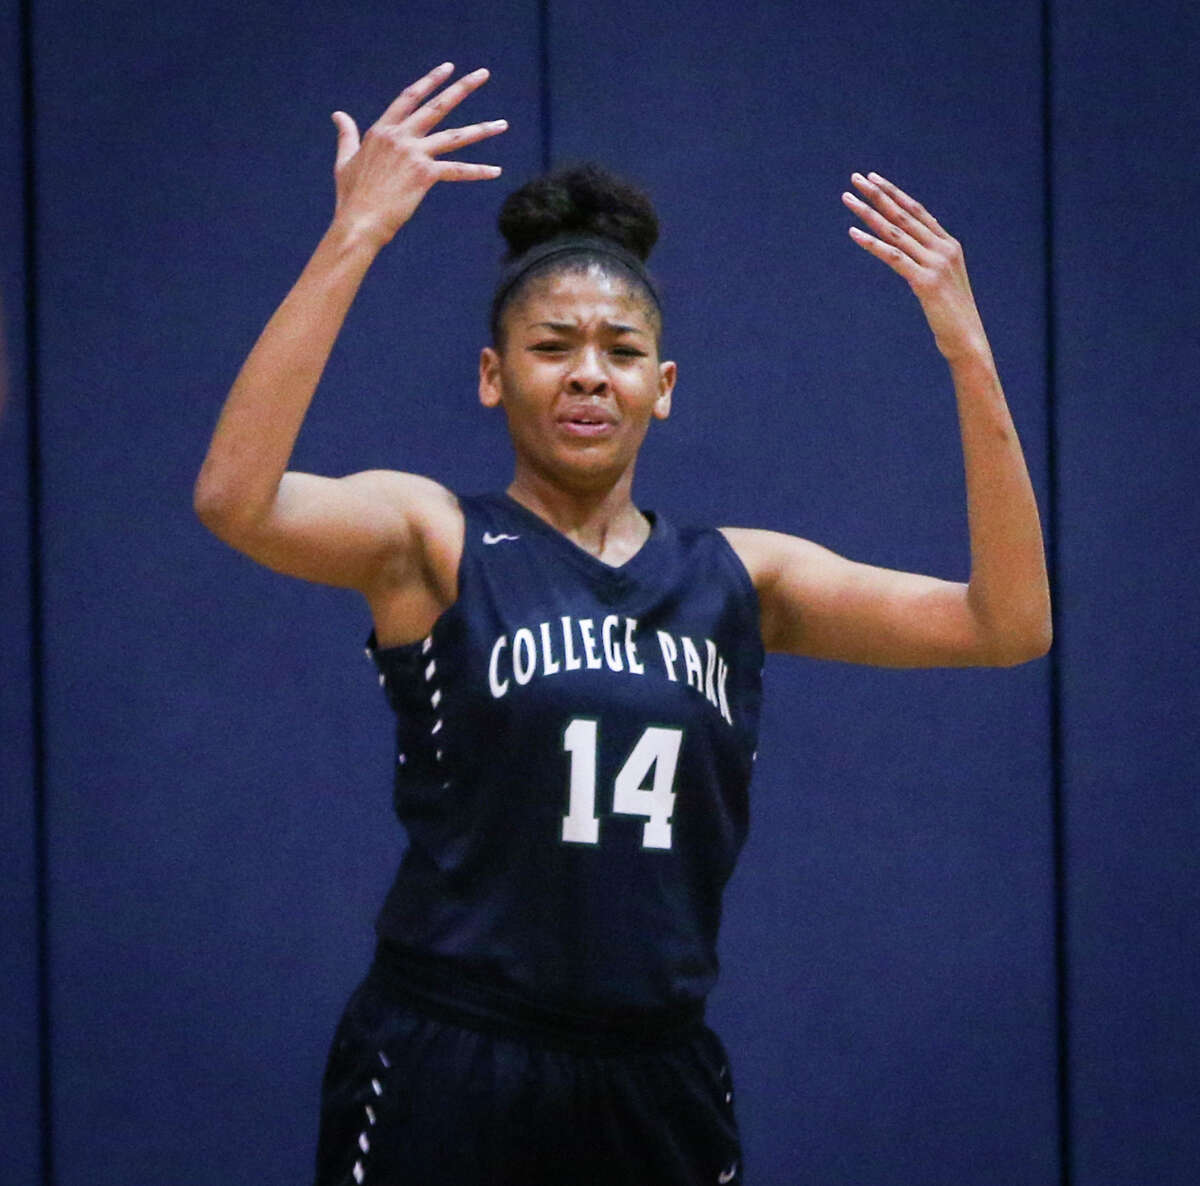 ROCKWALL 50, COLLEGE PARK 27 College Park'?•s Sandra Cannady (14) reacts after barely missing a basket at the halftime buzzer during the District 11-6A playoff girls basketball game against Rockwall on Monday, Feb. 13, 2017, in Jewett. (Michael Minasi / Chronicle)